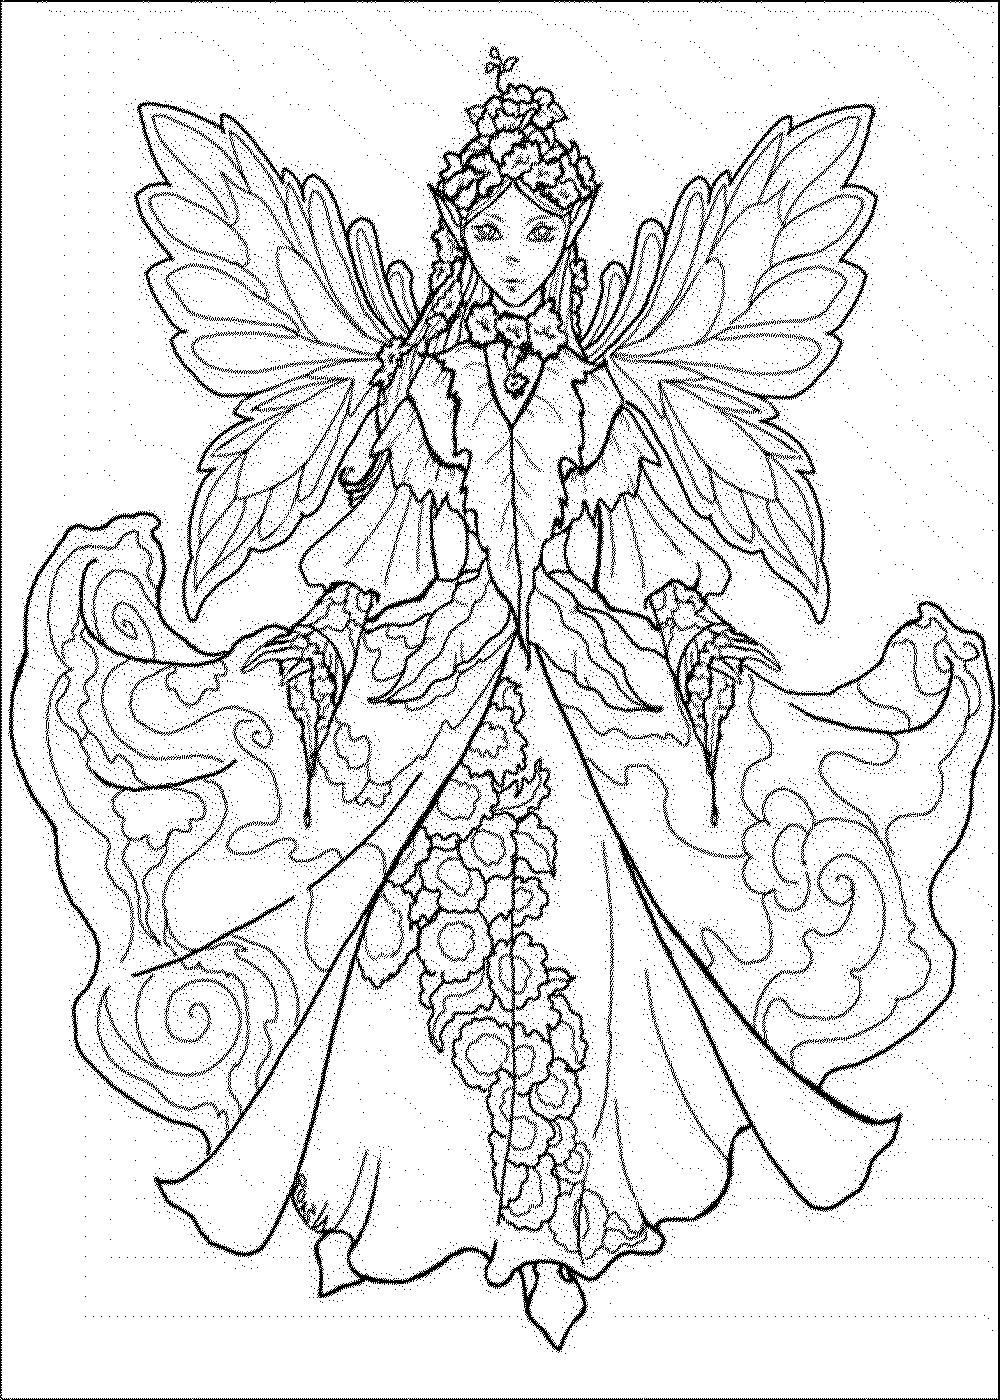 Awesome Coloring Pages For Adults
 The Special Characteristic of the Coloring Pages for Adults